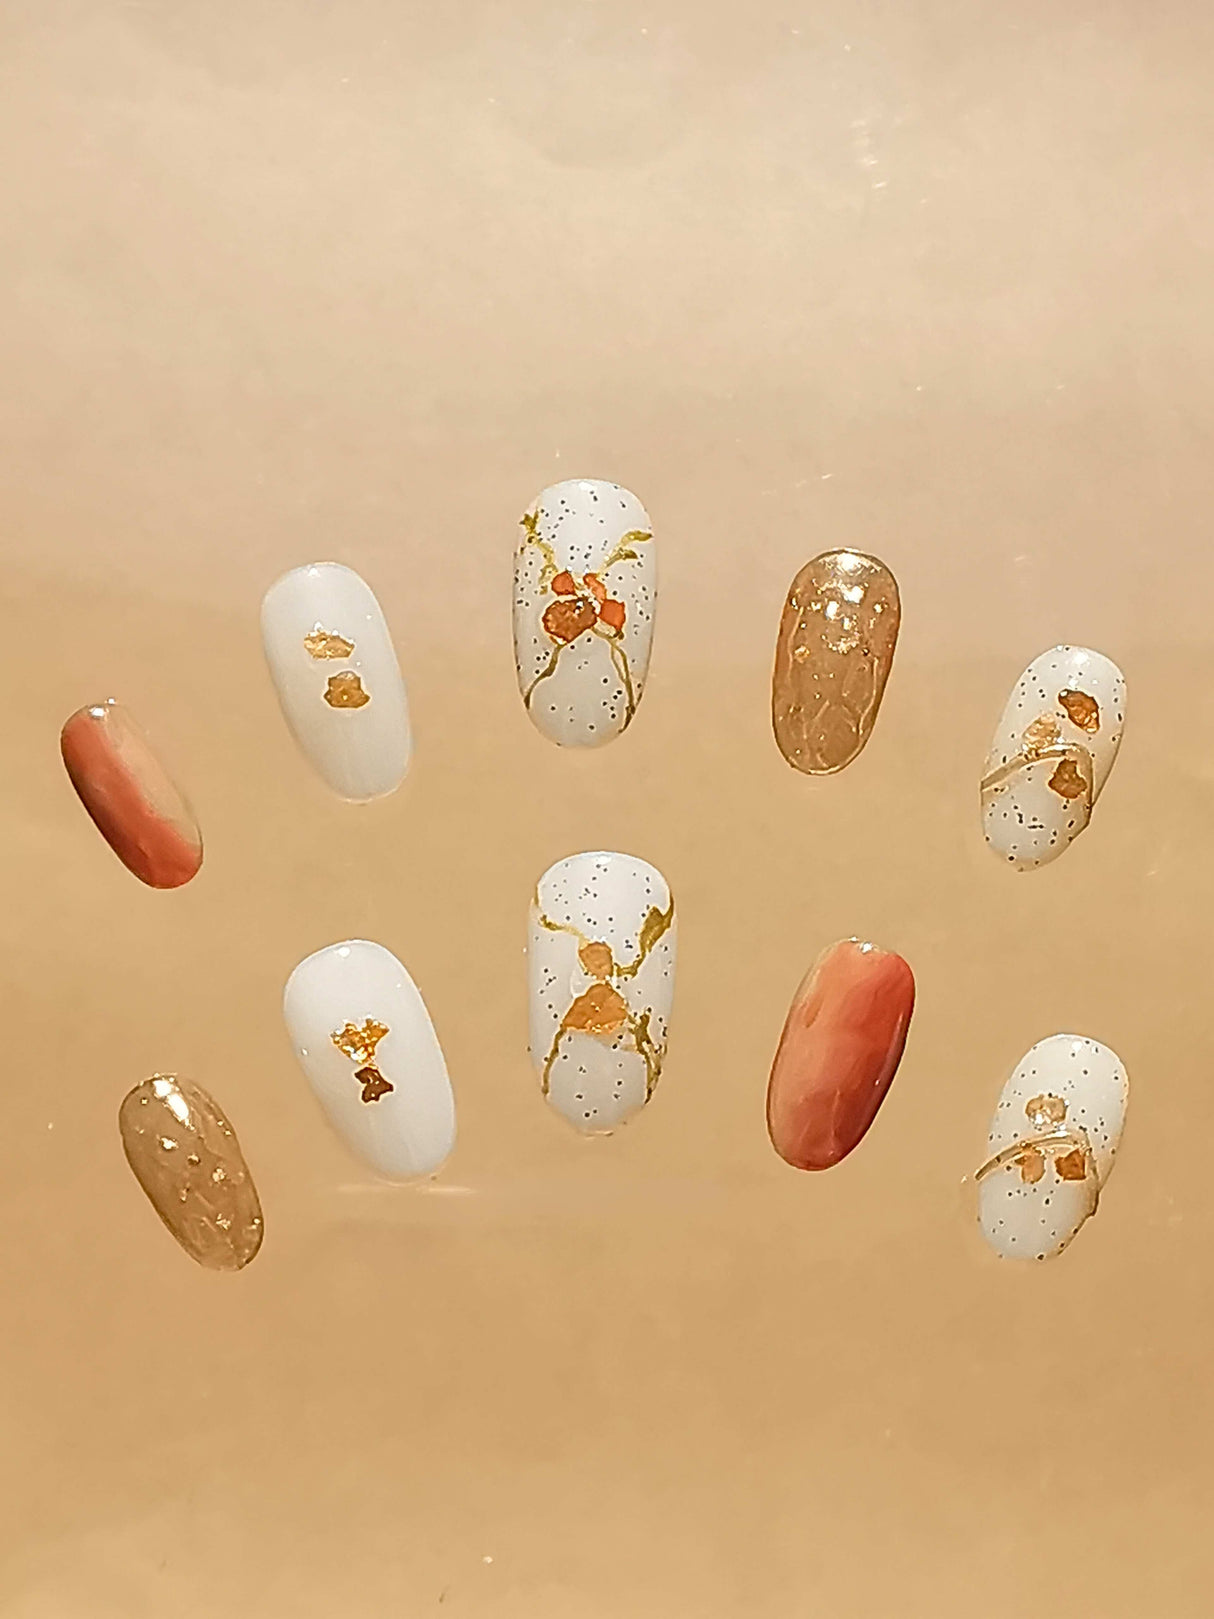 Fashionable and fancy nail art nails with color, pattern, and texture. Features solid and abstract designs with gold foil accents. A focus on elegance and luxury.